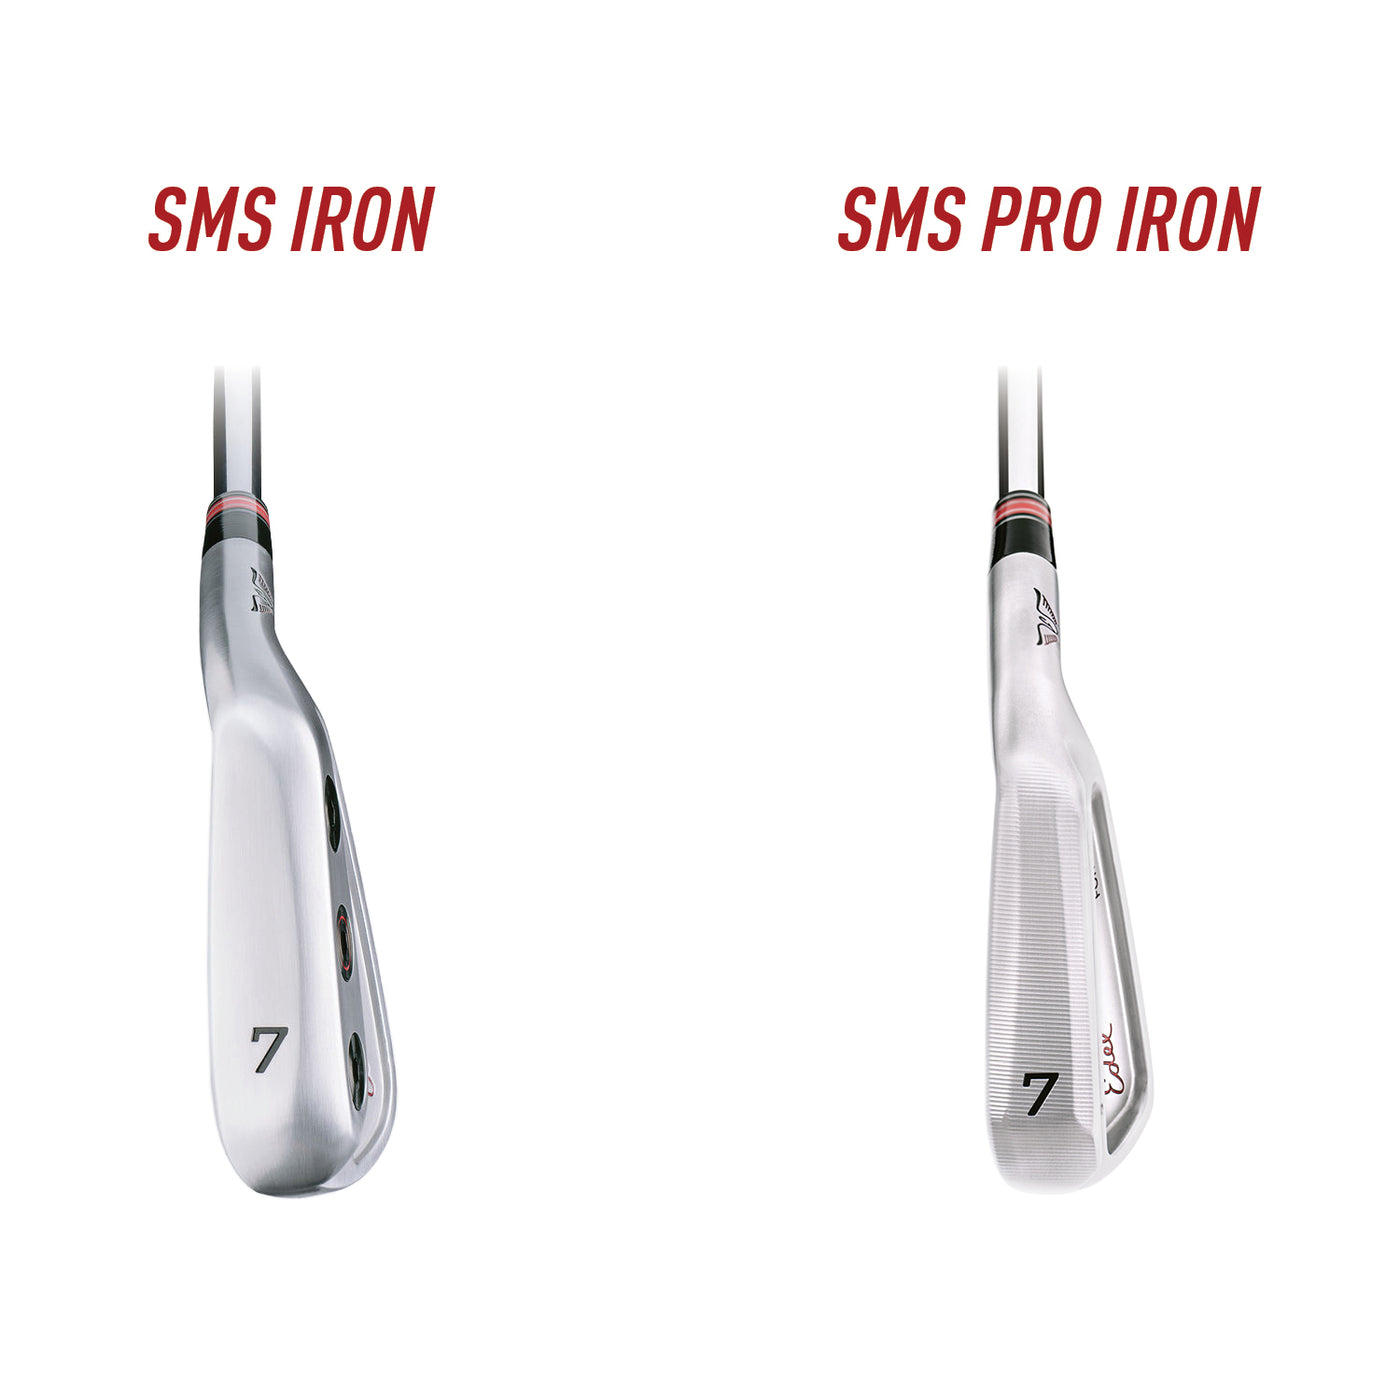 SMS vs. SMS Pro Irons Sole View